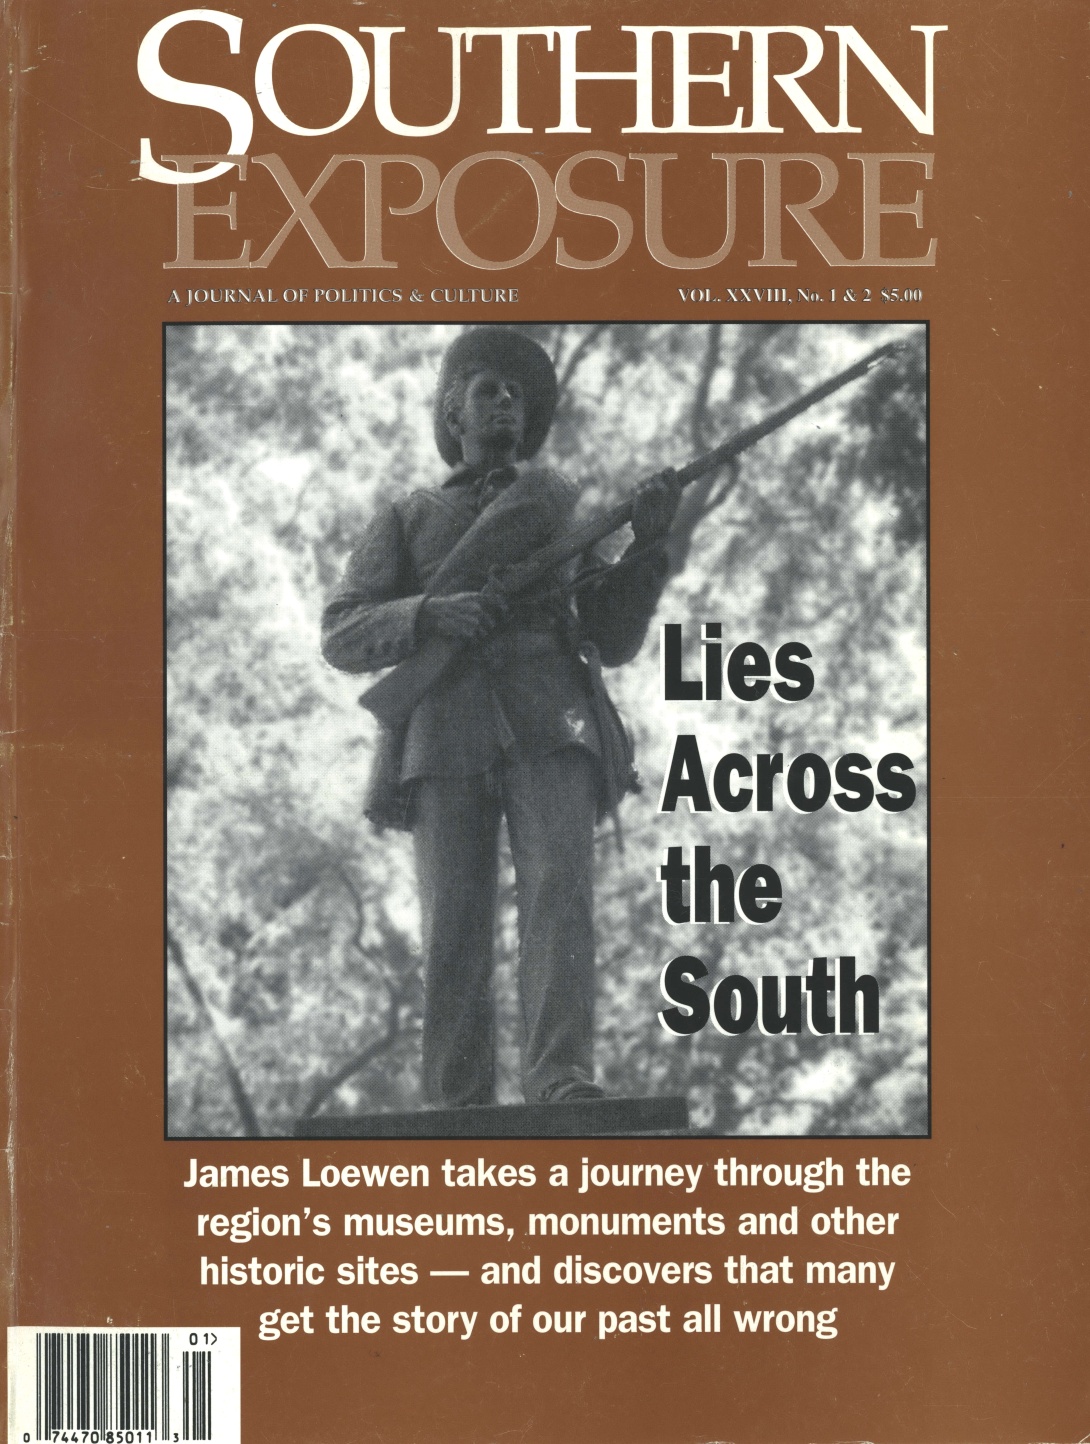 Magazine cover with photo of Confederate statue on brown background. Text reads "Lies Across the South"